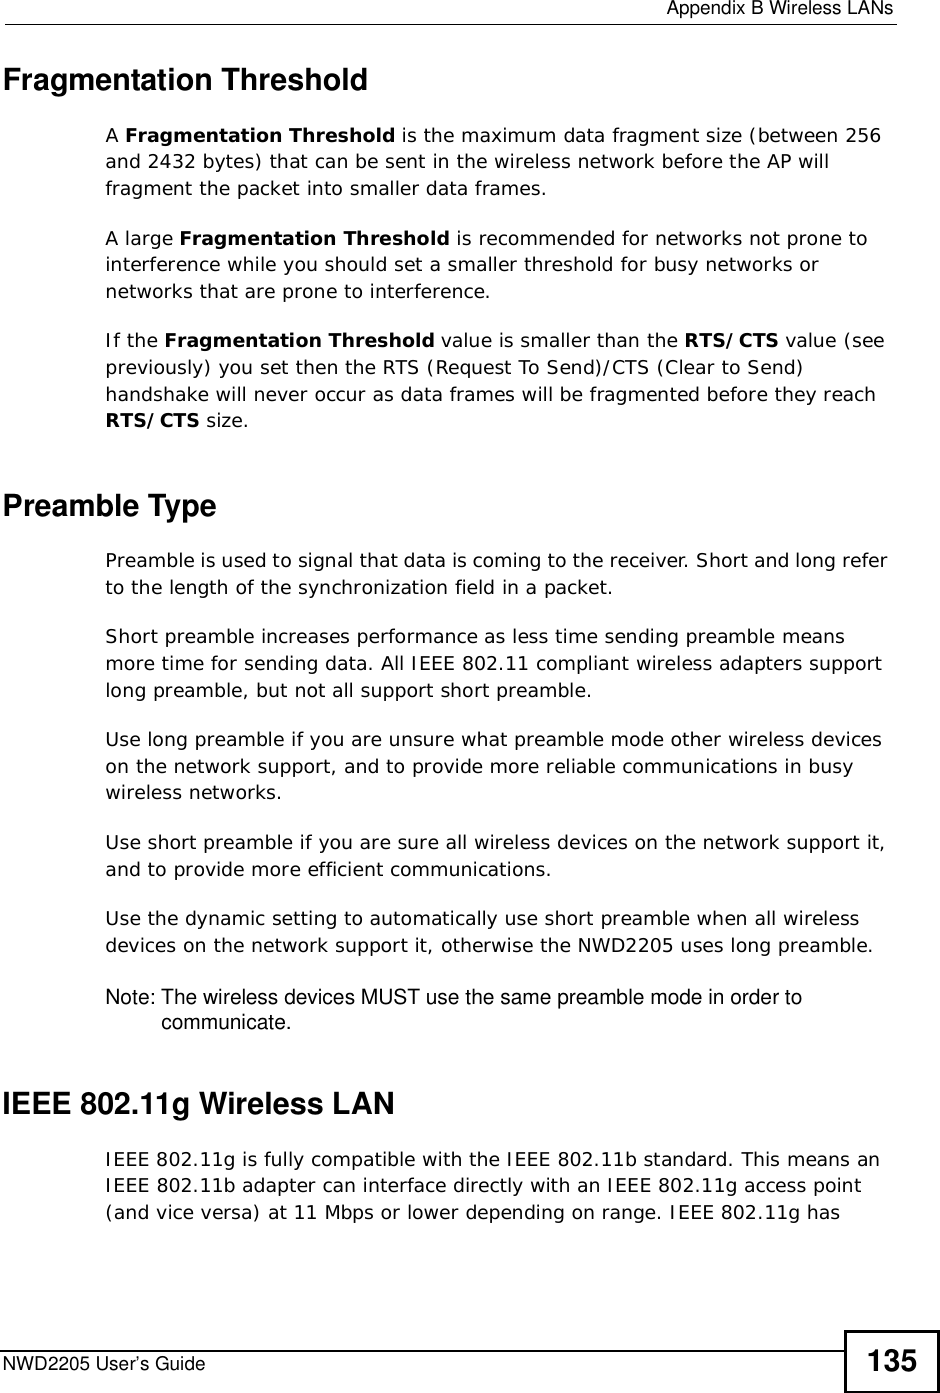  Appendix BWireless LANsNWD2205 User’s Guide 135Fragmentation ThresholdAFragmentation Threshold is the maximum data fragment size (between 256 and 2432 bytes) that can be sent in the wireless network before the AP will fragment the packet into smaller data frames.A large Fragmentation Threshold is recommended for networks not prone to interference while you should set a smaller threshold for busy networks or networks that are prone to interference.If the Fragmentation Threshold value is smaller than the RTS/CTS value (see previously) you set then the RTS (Request To Send)/CTS (Clear to Send) handshake will never occur as data frames will be fragmented before they reach RTS/CTS size.Preamble TypePreamble is used to signal that data is coming to the receiver. Short and long refer to the length of the synchronization field in a packet.Short preamble increases performance as less time sending preamble means more time for sending data. All IEEE 802.11 compliant wireless adapters support long preamble, but not all support short preamble. Use long preamble if you are unsure what preamble mode other wireless devices on the network support, and to provide more reliable communications in busy wireless networks. Use short preamble if you are sure all wireless devices on the network support it, and to provide more efficient communications.Use the dynamic setting to automatically use short preamble when all wireless devices on the network support it, otherwise the NWD2205 uses long preamble.Note: The wireless devices MUSTuse the same preamble mode in order to communicate.IEEE 802.11g Wireless LANIEEE 802.11g is fully compatible with the IEEE 802.11b standard. This means an IEEE 802.11b adapter can interface directly with an IEEE 802.11g access point (and vice versa) at 11 Mbps or lower depending on range. IEEE 802.11g has 